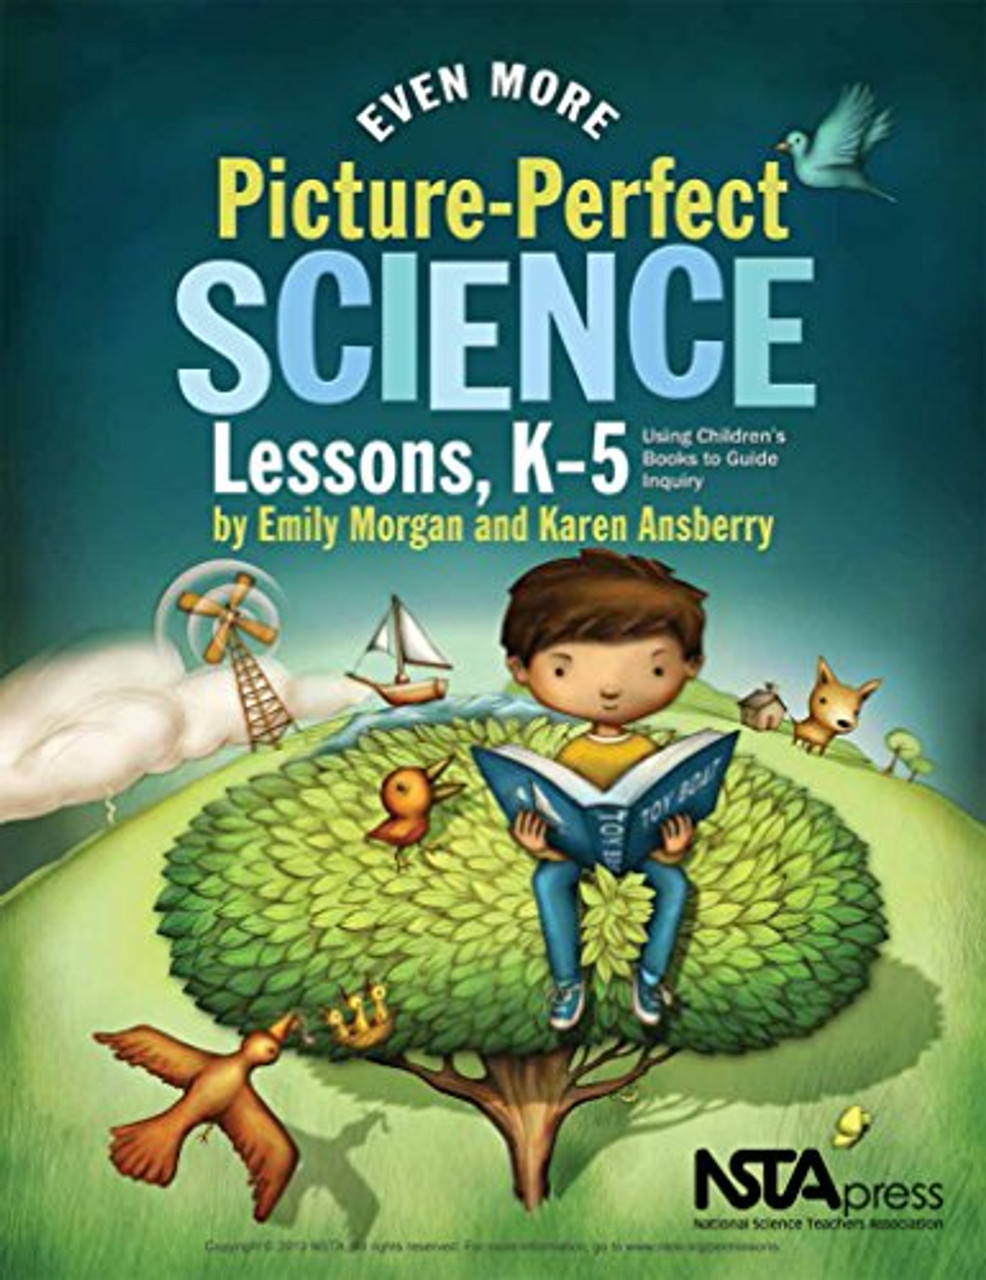 Even More Picture-Perfect Science Lessons: Using Children's Books to Guide Inquiry, K-5 by Emily Morgan